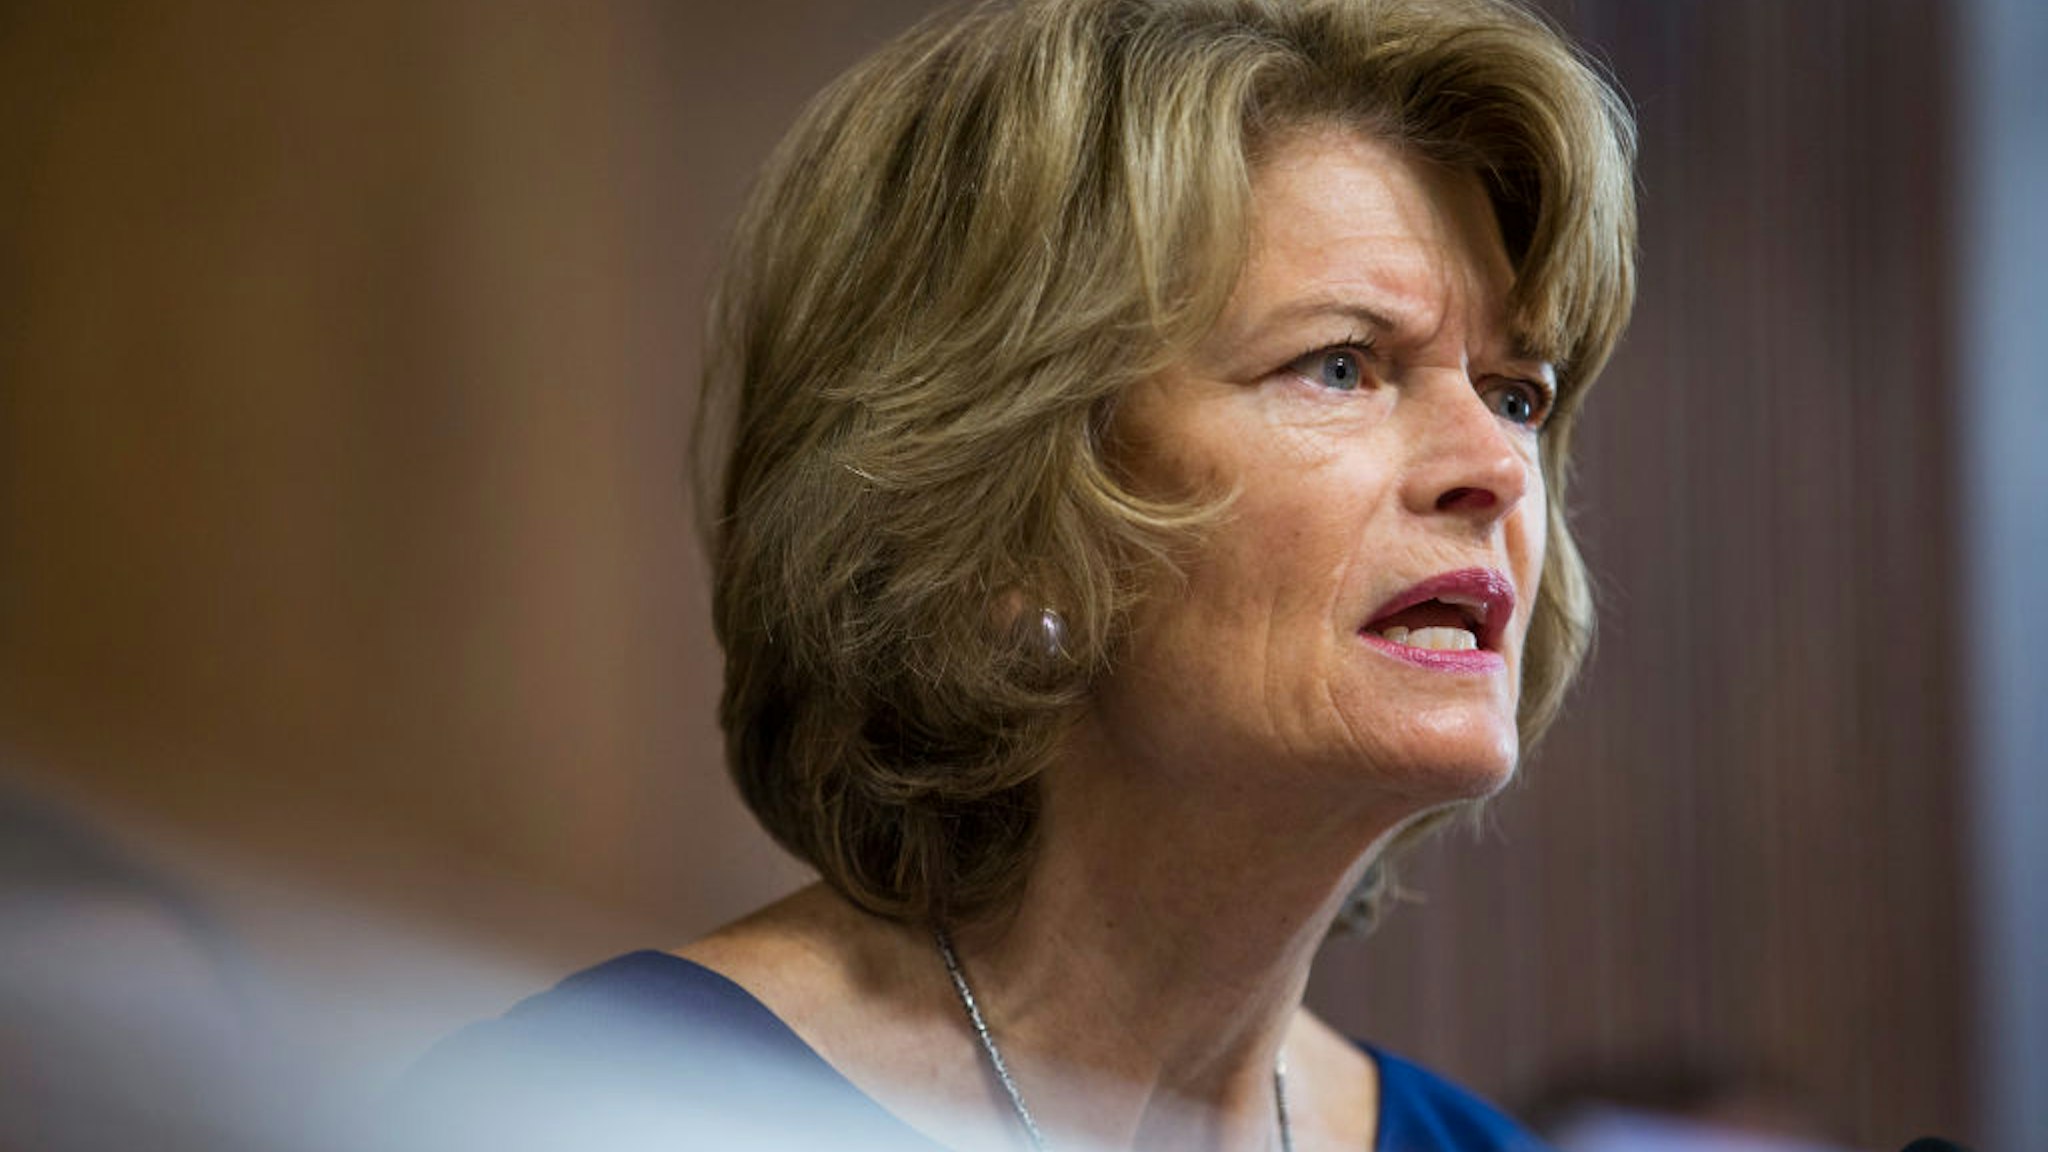 Senate Energy and Natural Resources Committee Chairman Senator Lisa Murkowski (R-AK) speaks during a Senate Energy and Natural Resources Committee confirmation hearing on March 28, 2019 in Washington, DC.